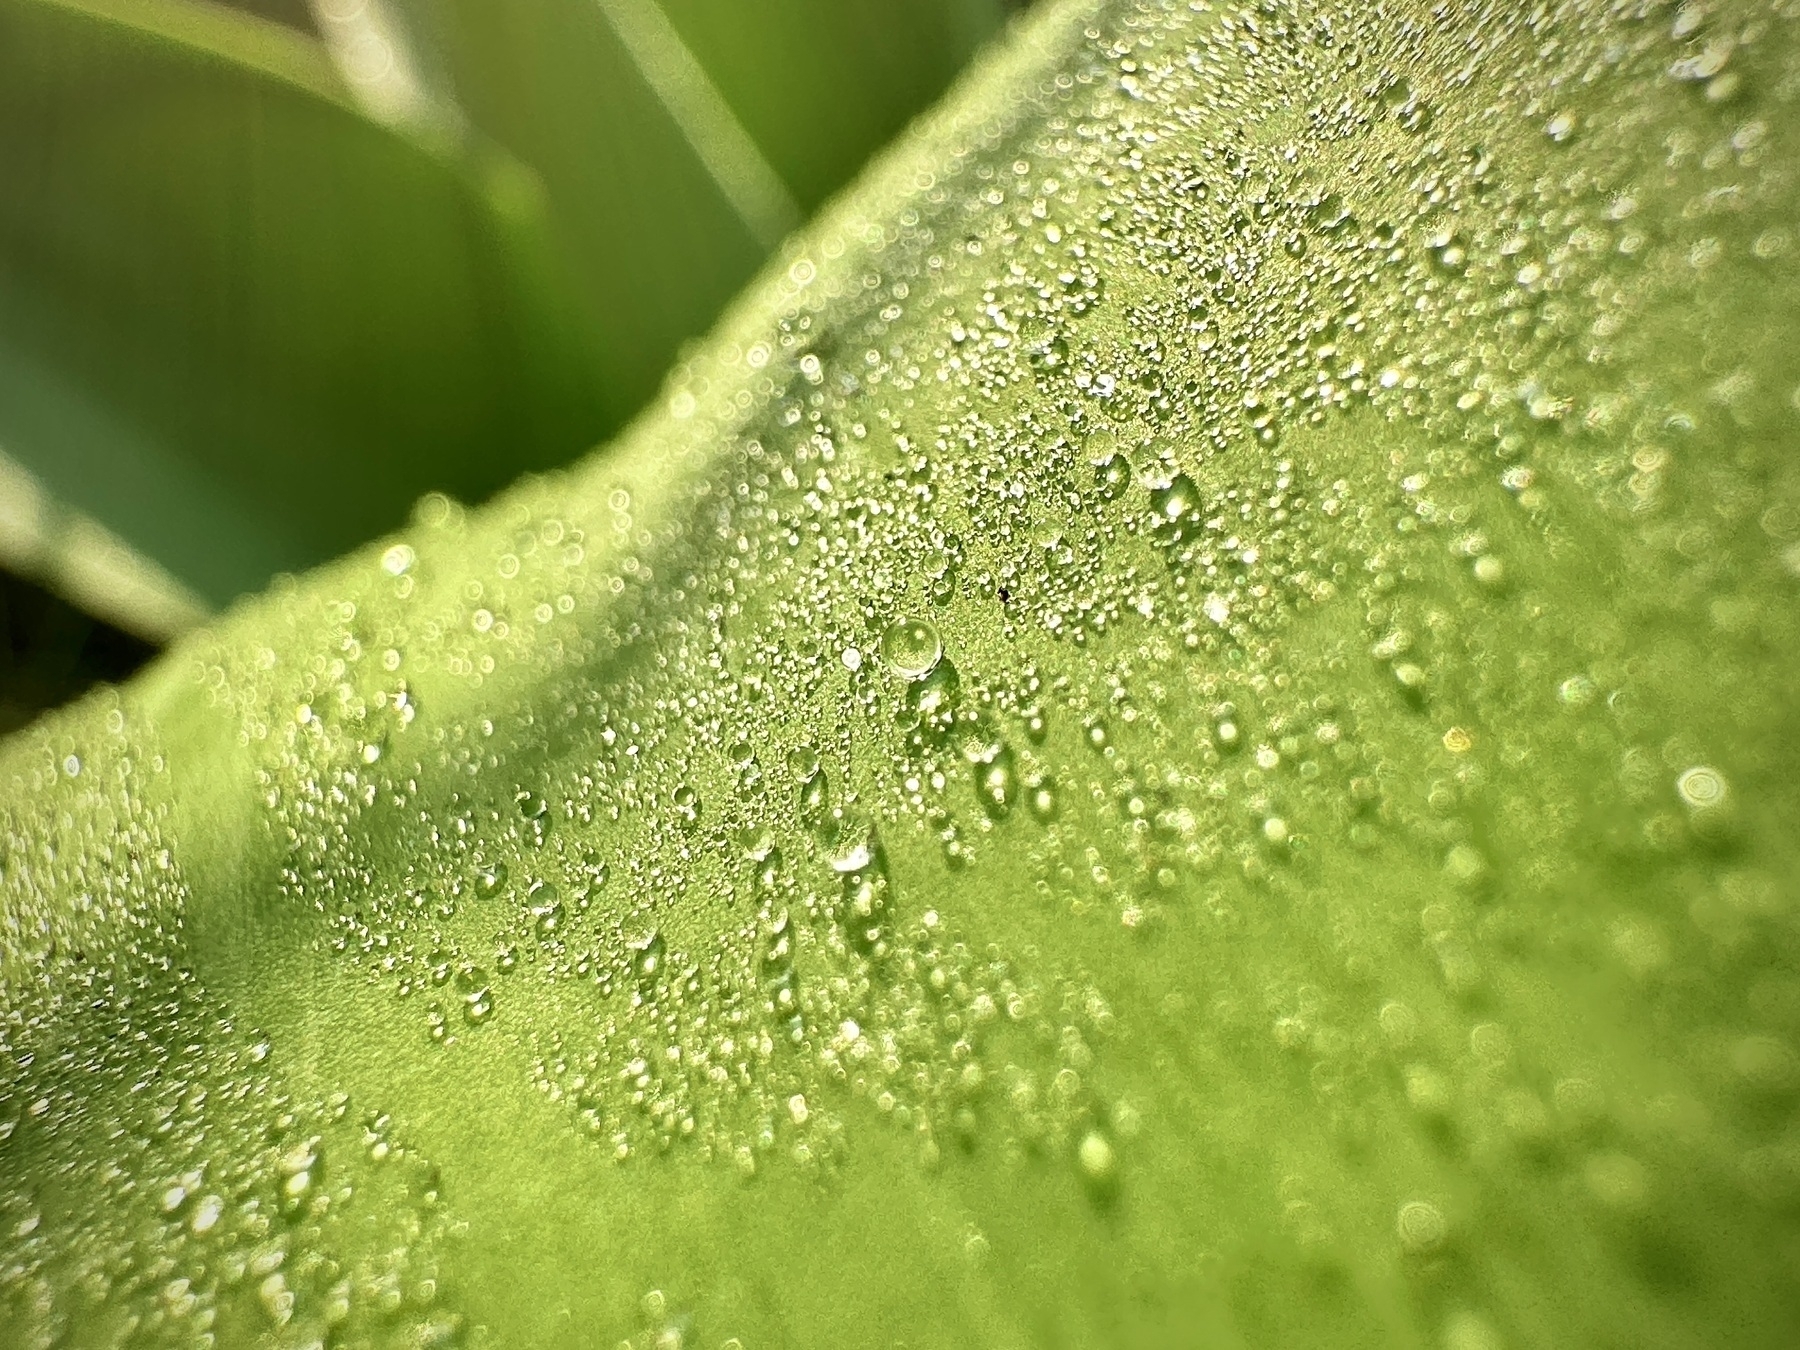 A closeup of the spiked leaf of an agave, dew drops glistening in the morning light.